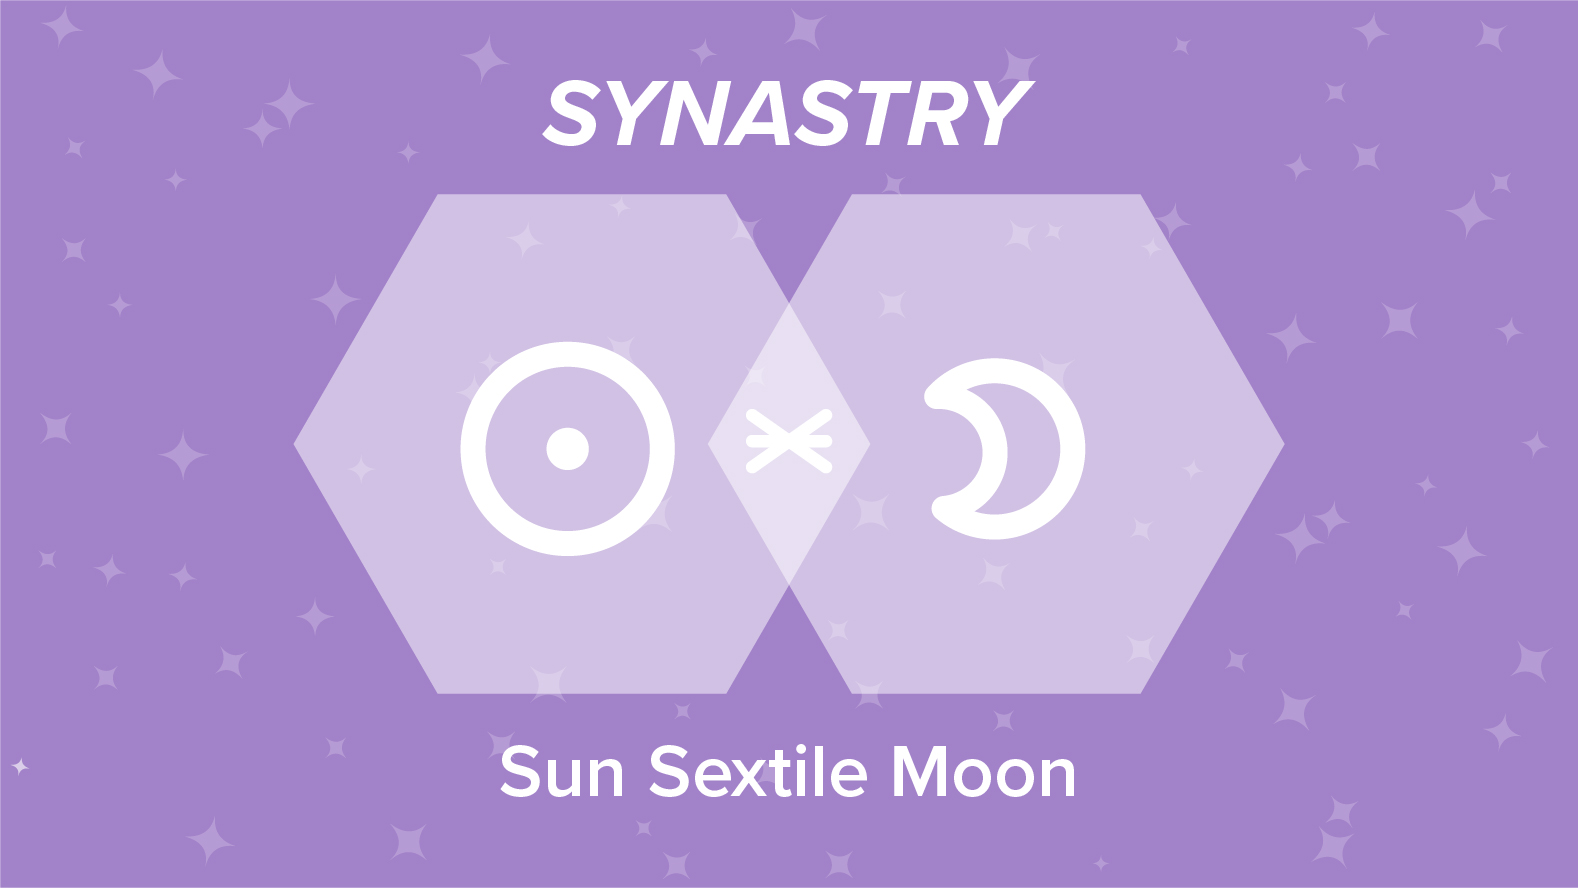 Sun Sextile Moon Synastry: Relationships and Friendships Explained